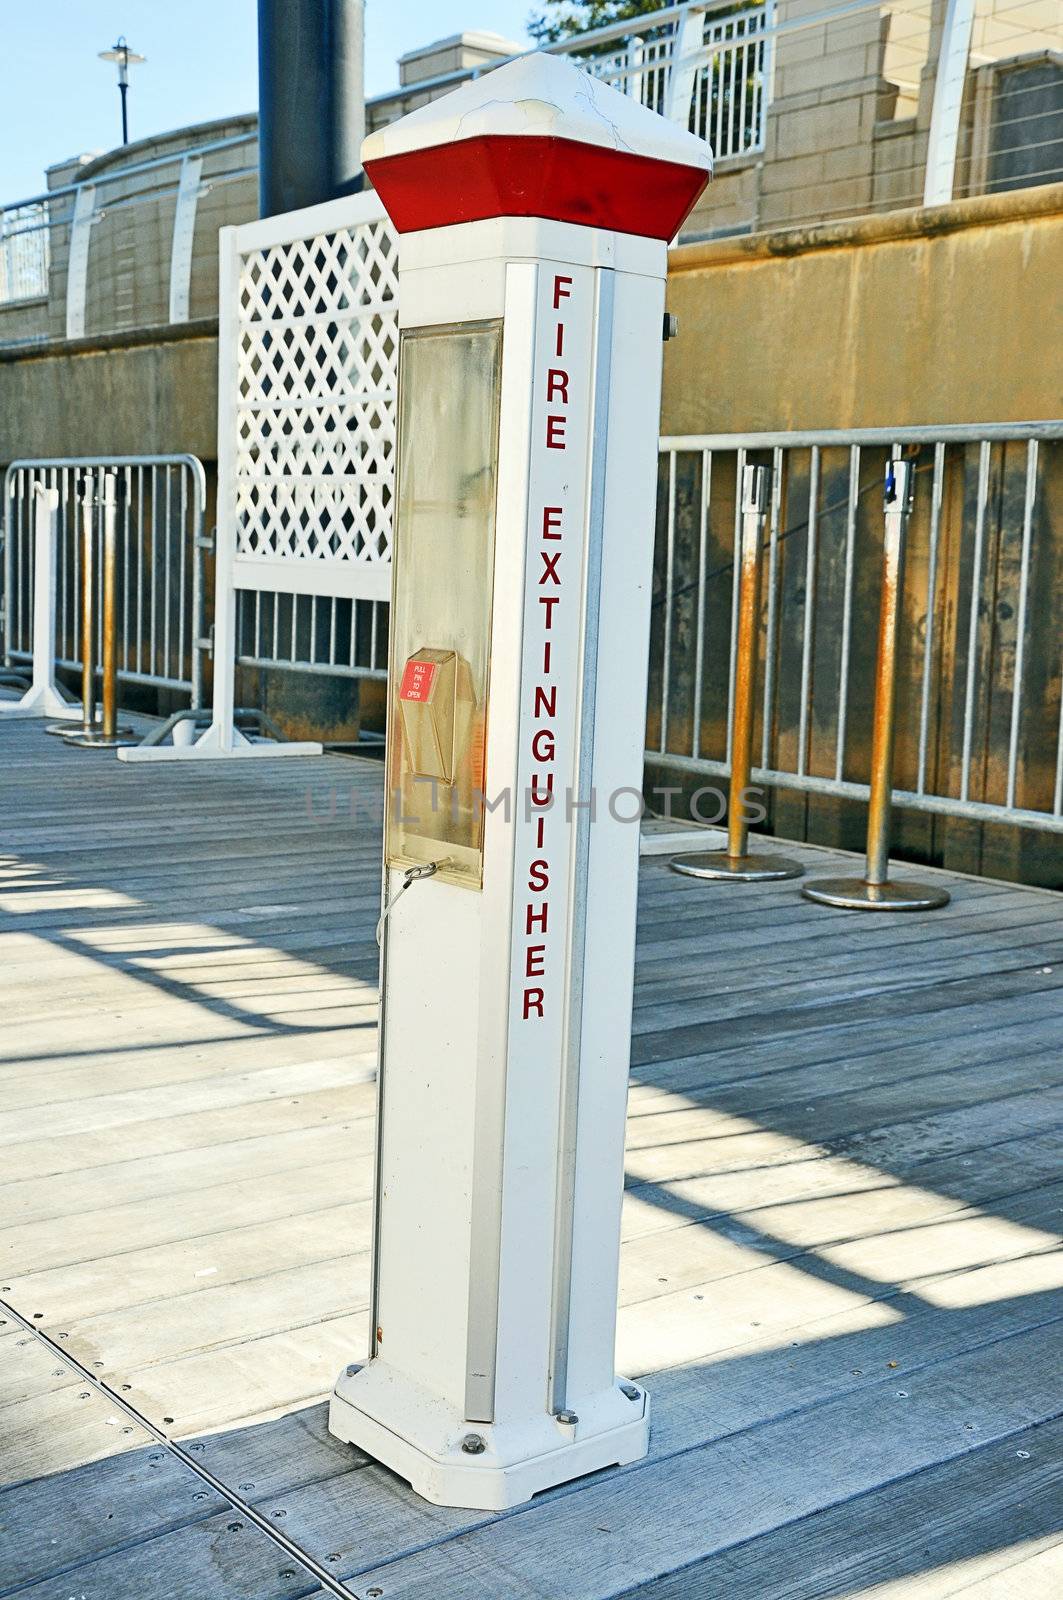 Fire extinguisher on boat dock.